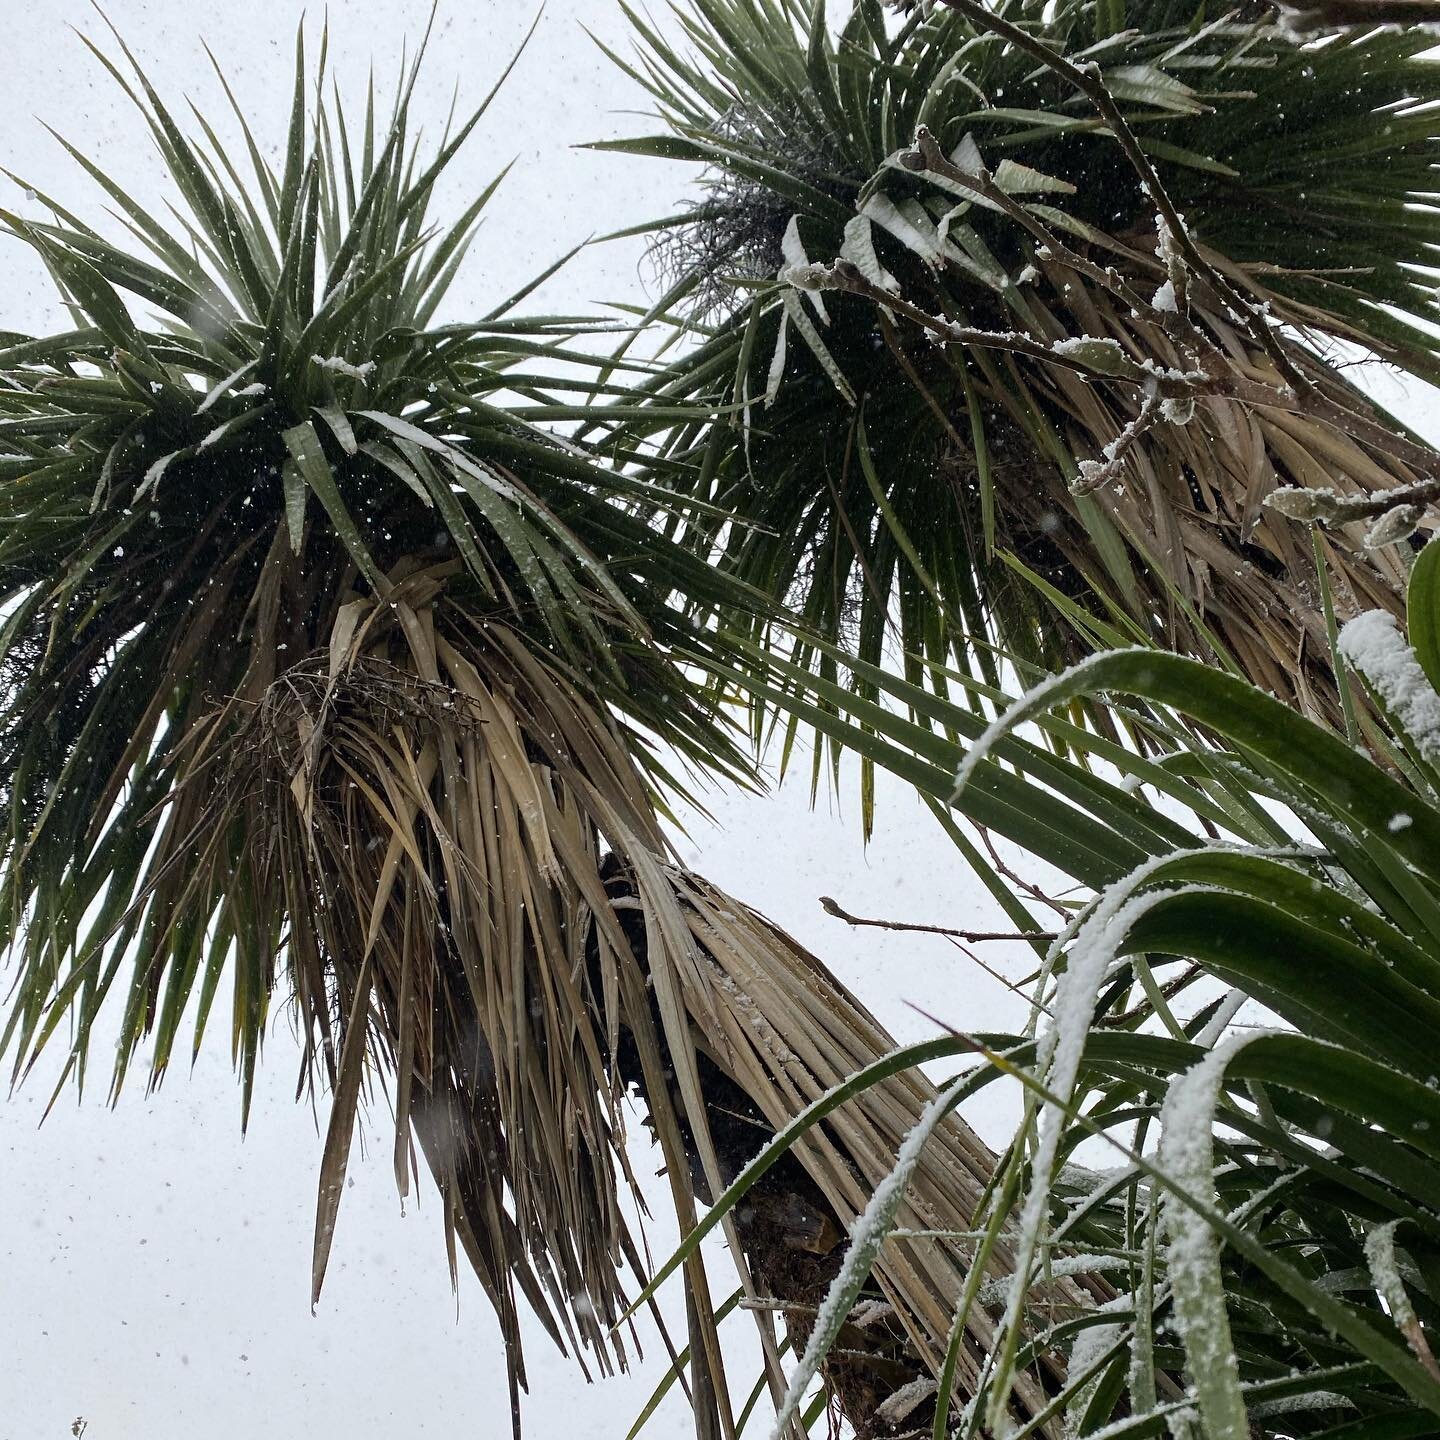 Pictures of plants that shouldn&rsquo;t have snow on them, but do ❄️
.
.
.
#palmtrees #jasmine #bamboo #olivetree #beastfromtheeast2  #snowday #snow #flora #plants #plantsofinstagram